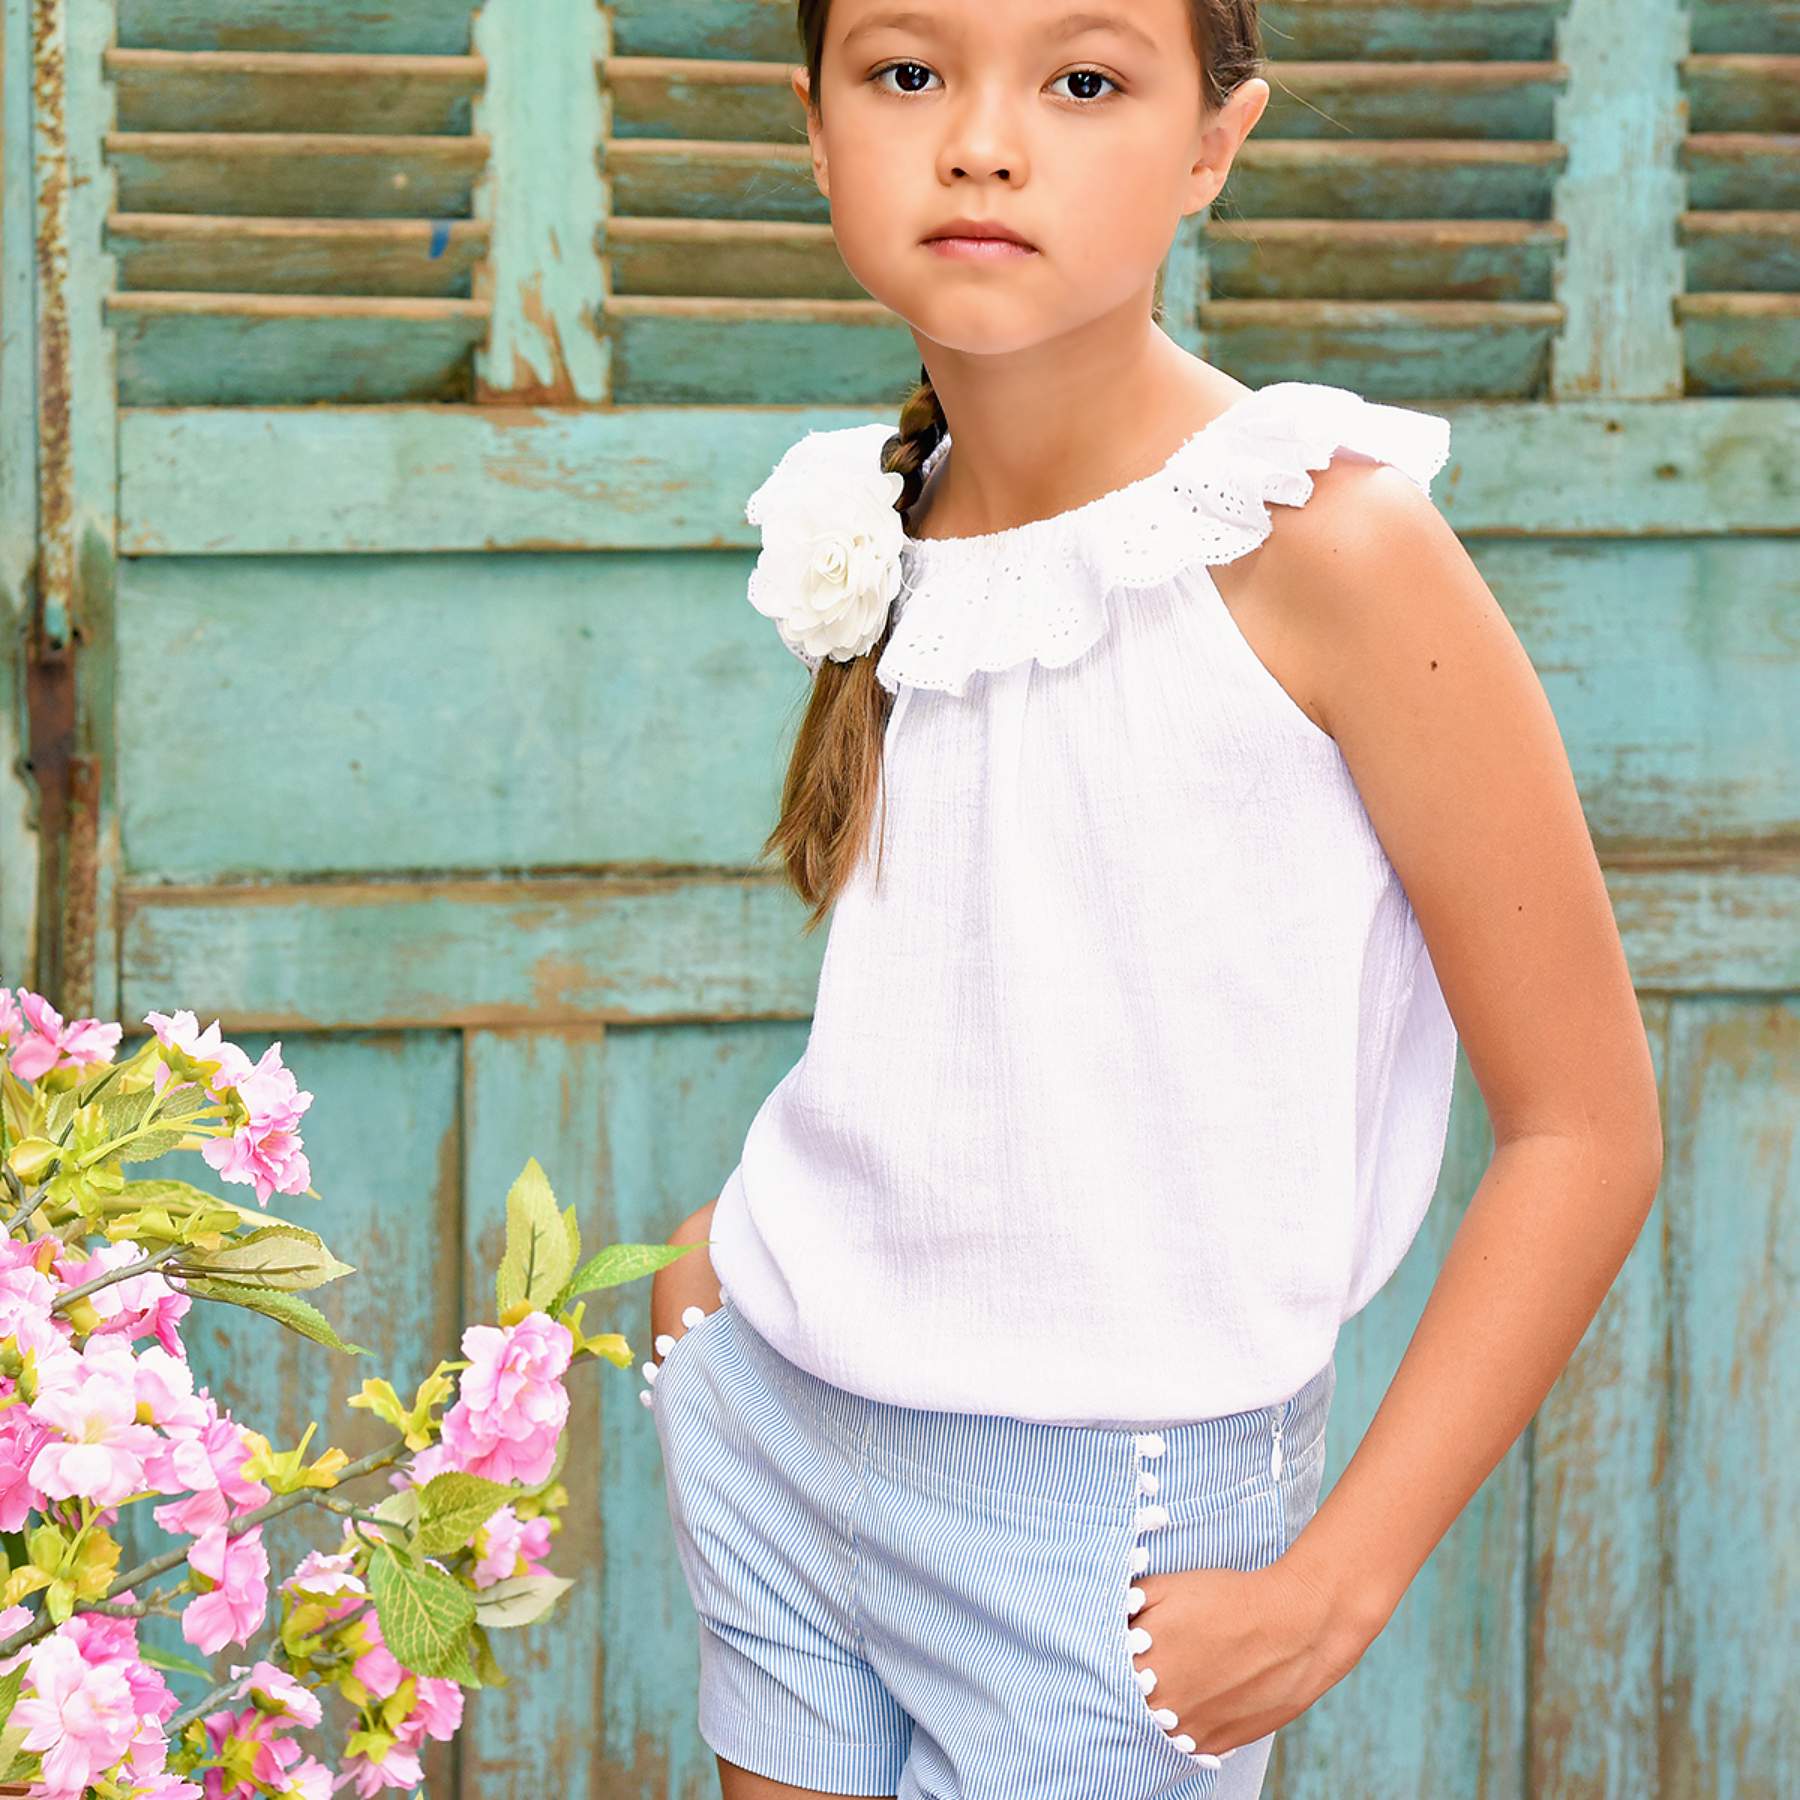 Summer shorts with dark blue and white stripes girl cotton with. white tassels on the pockets and pocket. Elegant and trendy shorts for girls from the children's fashion brand LA FAUTE A VOLTAIRE